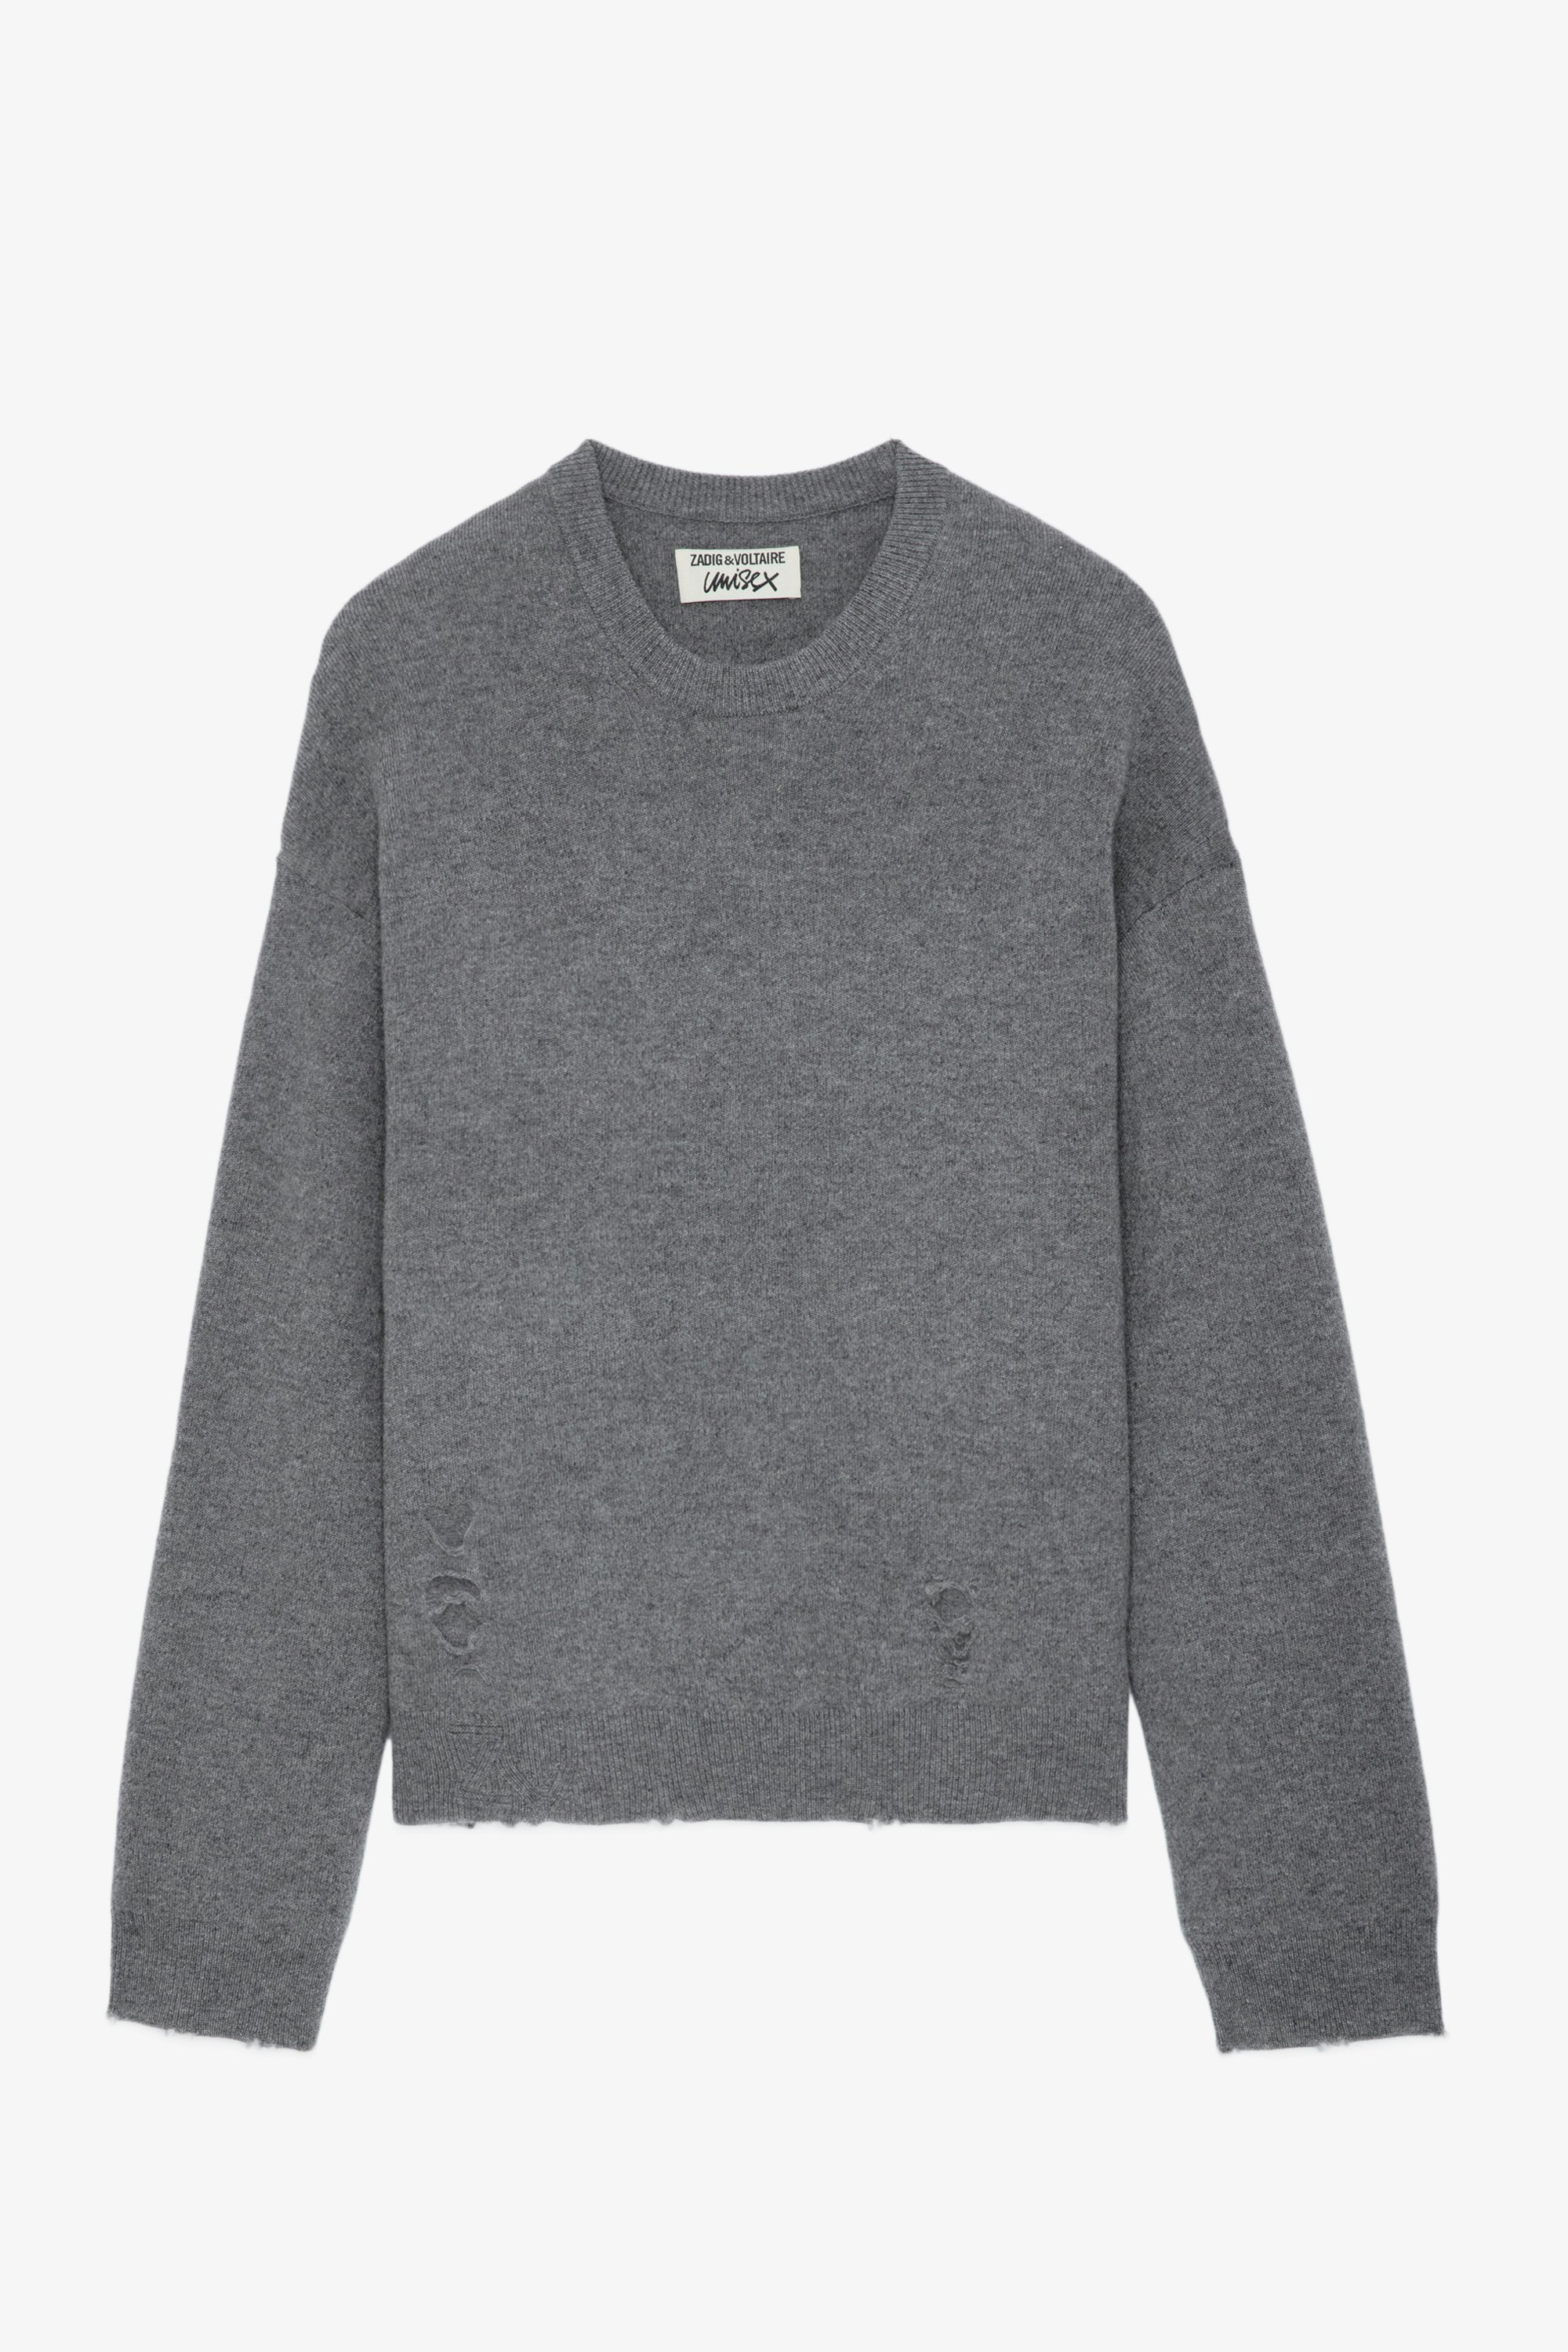 Marko Sweater - Grey distressed-effect wool jumper with long sleeves and round neckline.